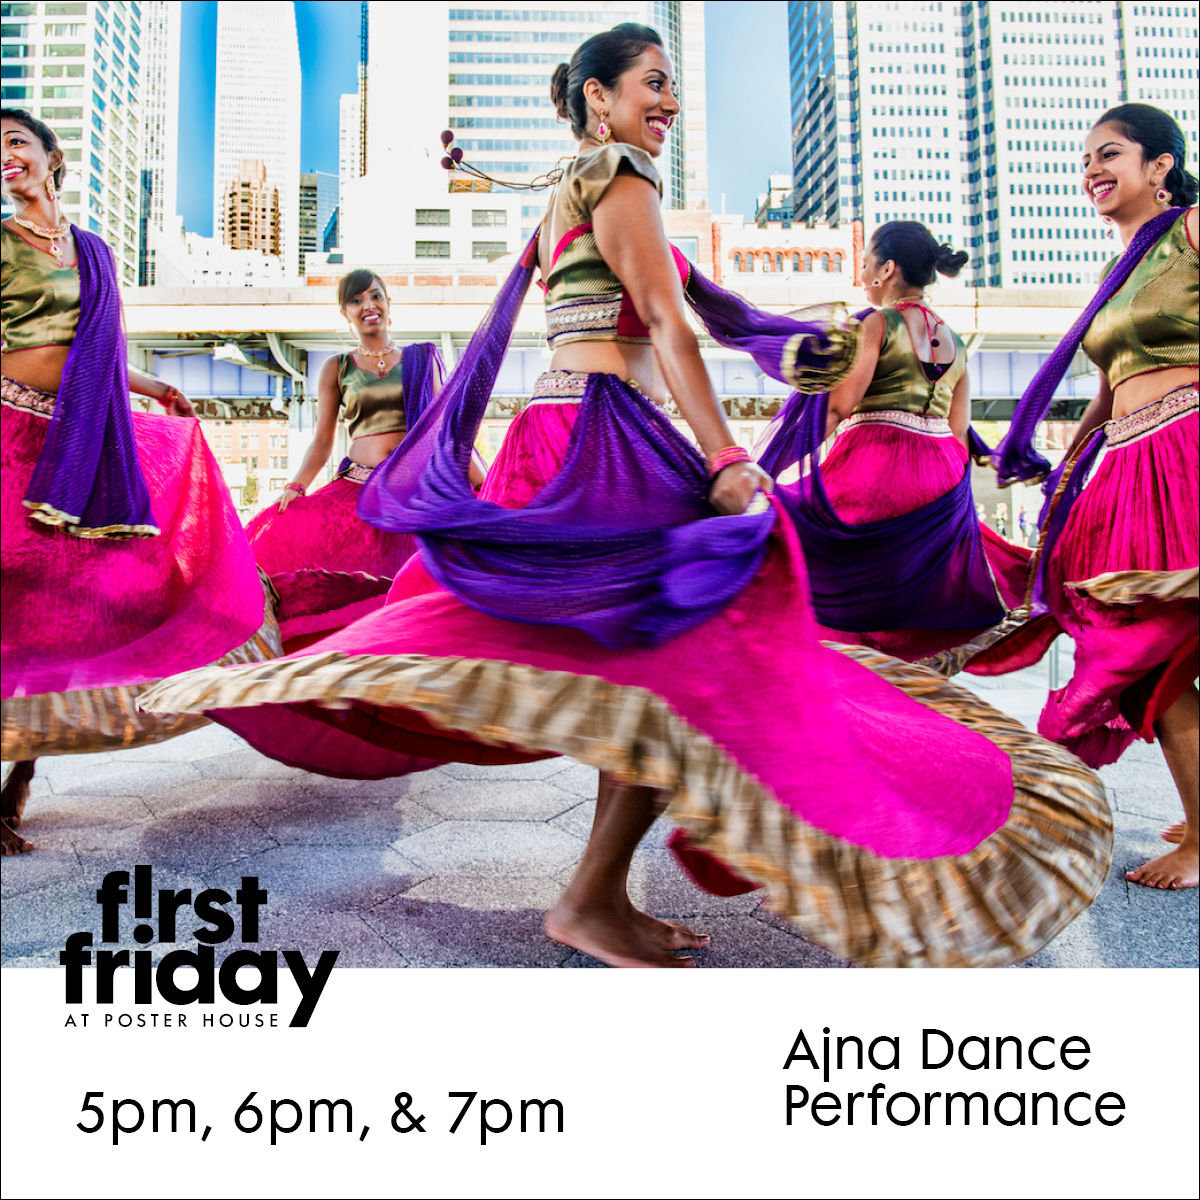 First Friday ad featuring a photo of Indian women dancing.